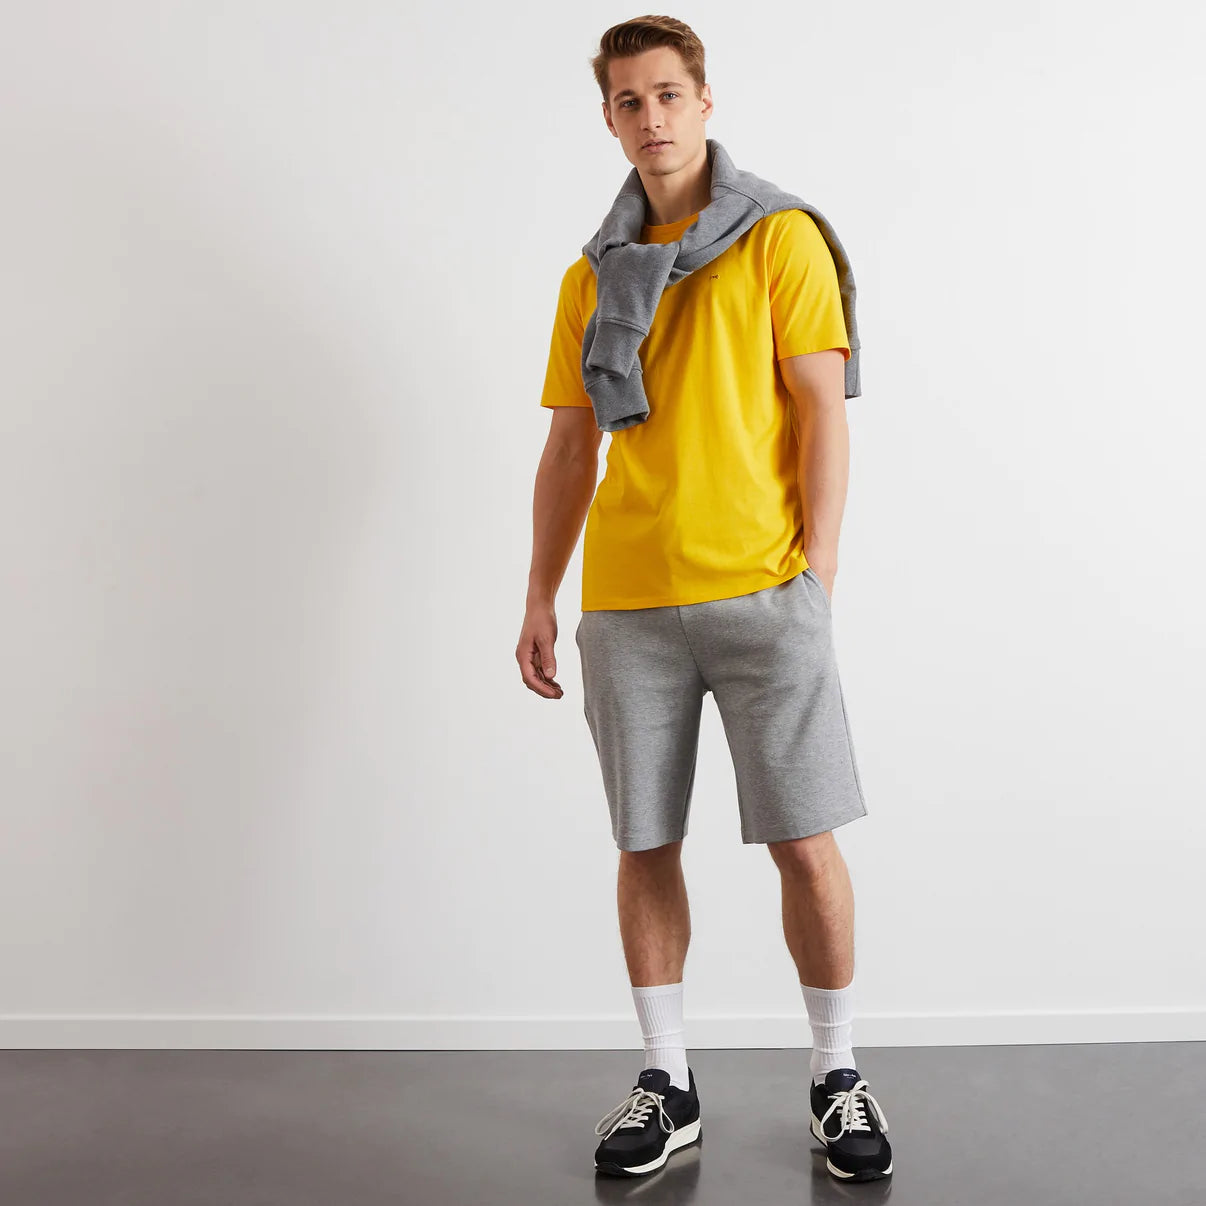 Cotton jersey t-shirt in yellow by Eden Park